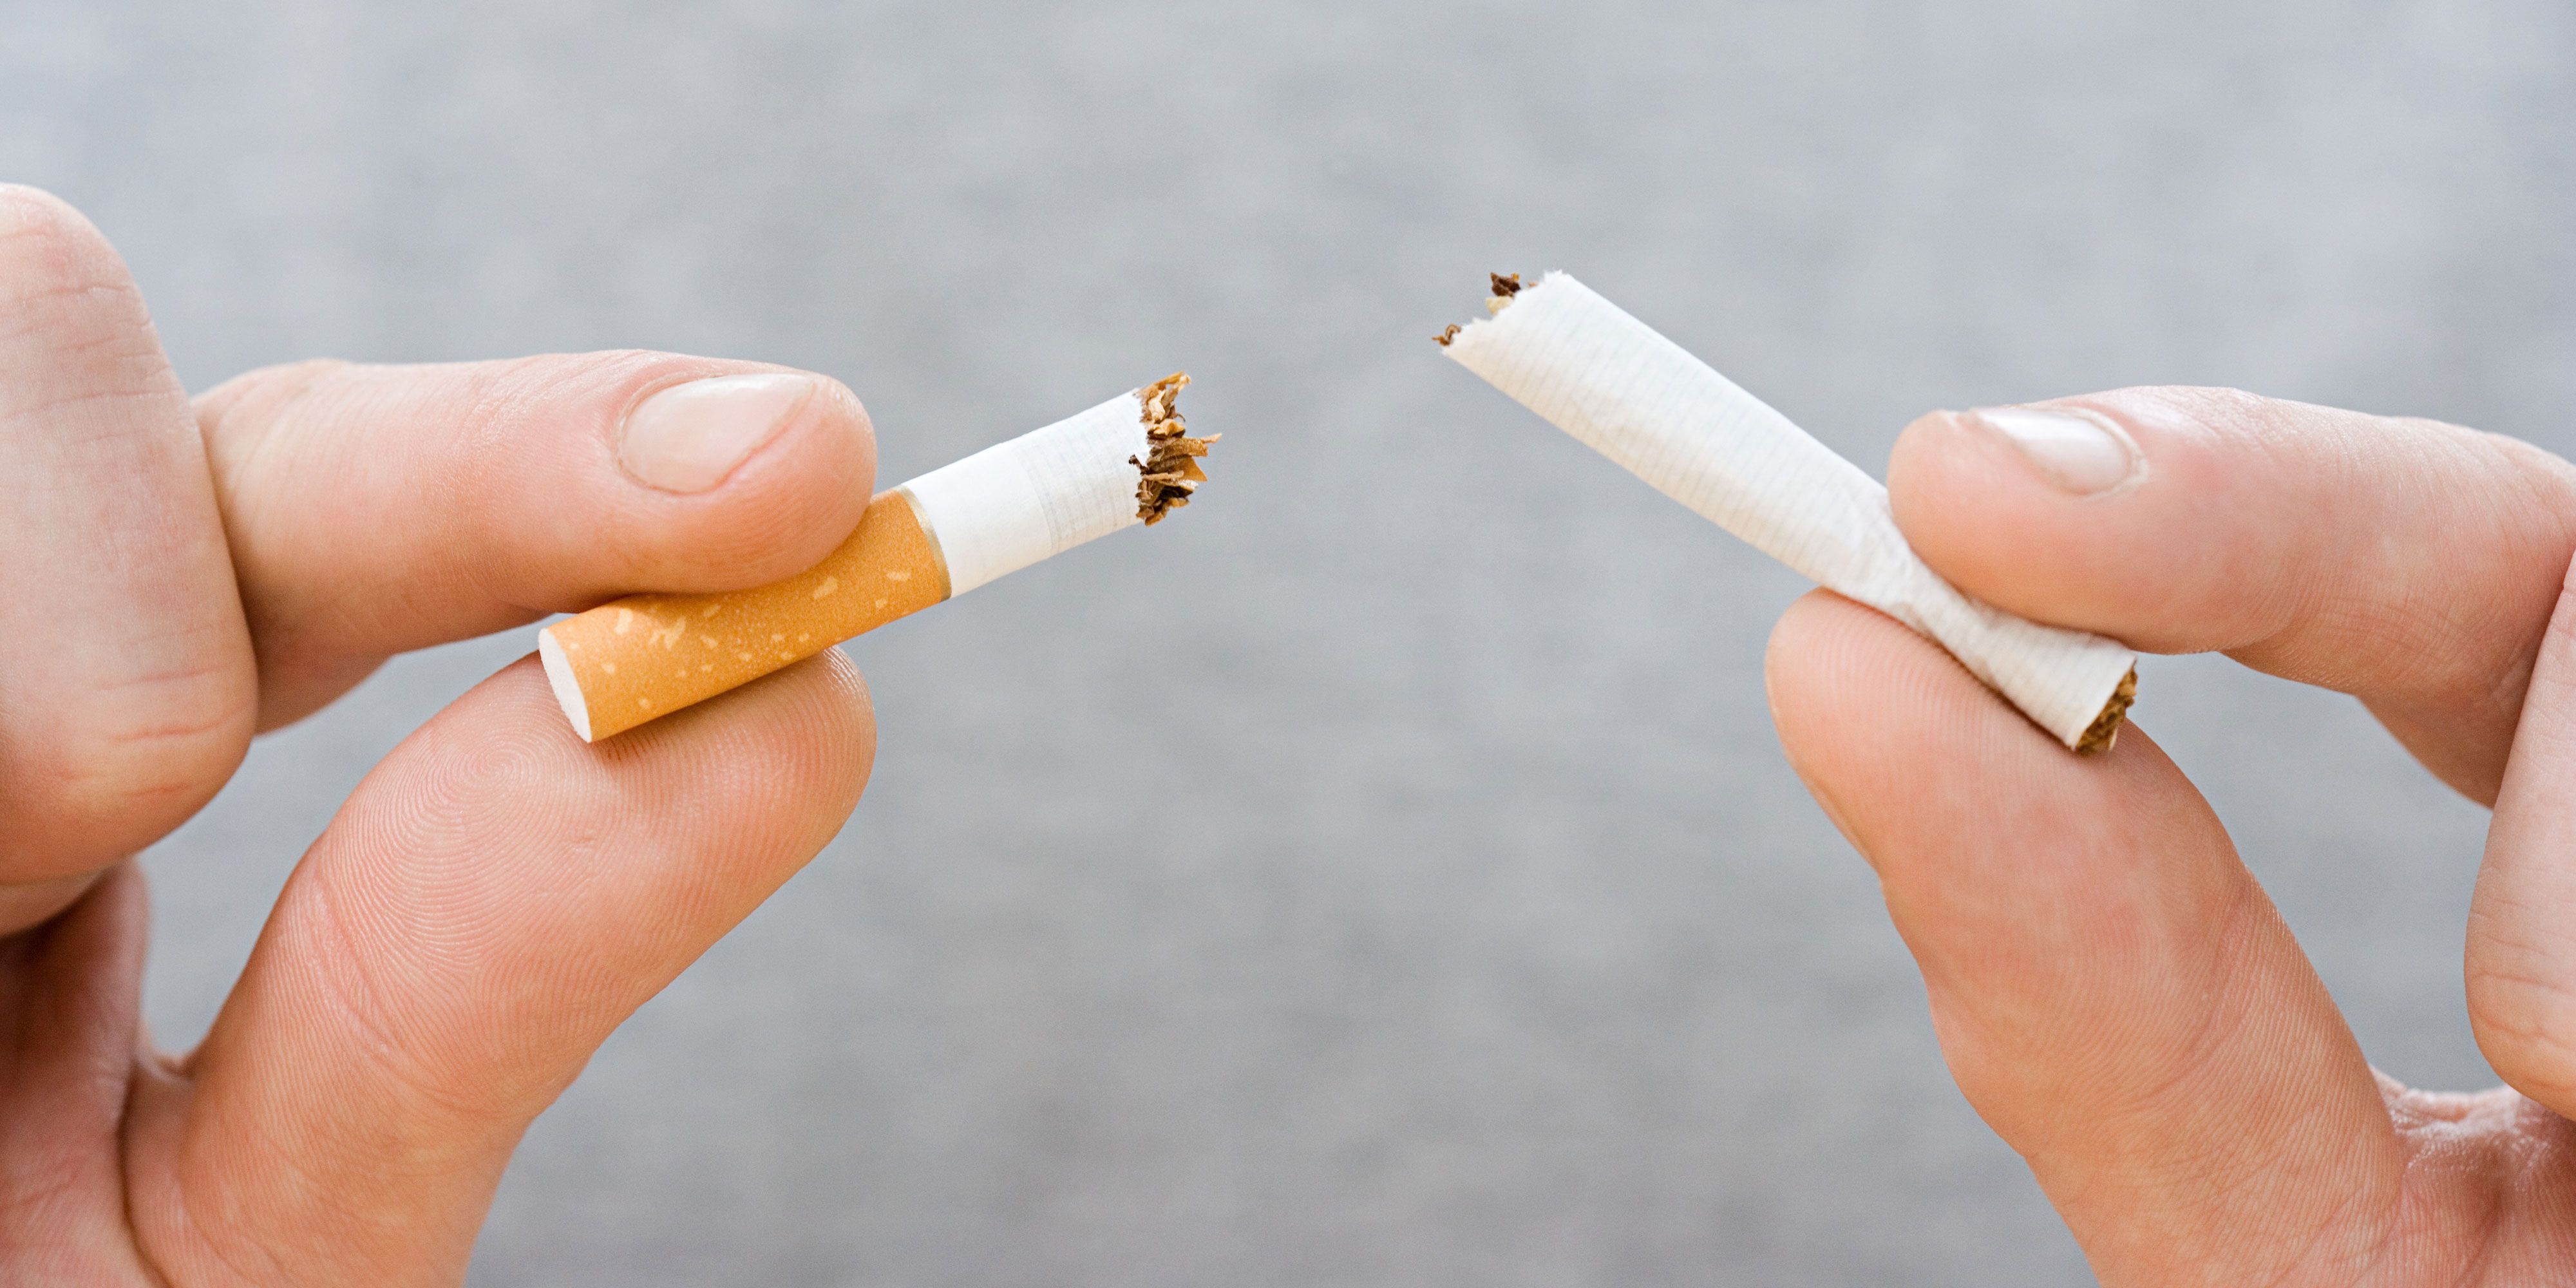 CIGARETTES RATED ON TAR, NICOTINE - The New York Times